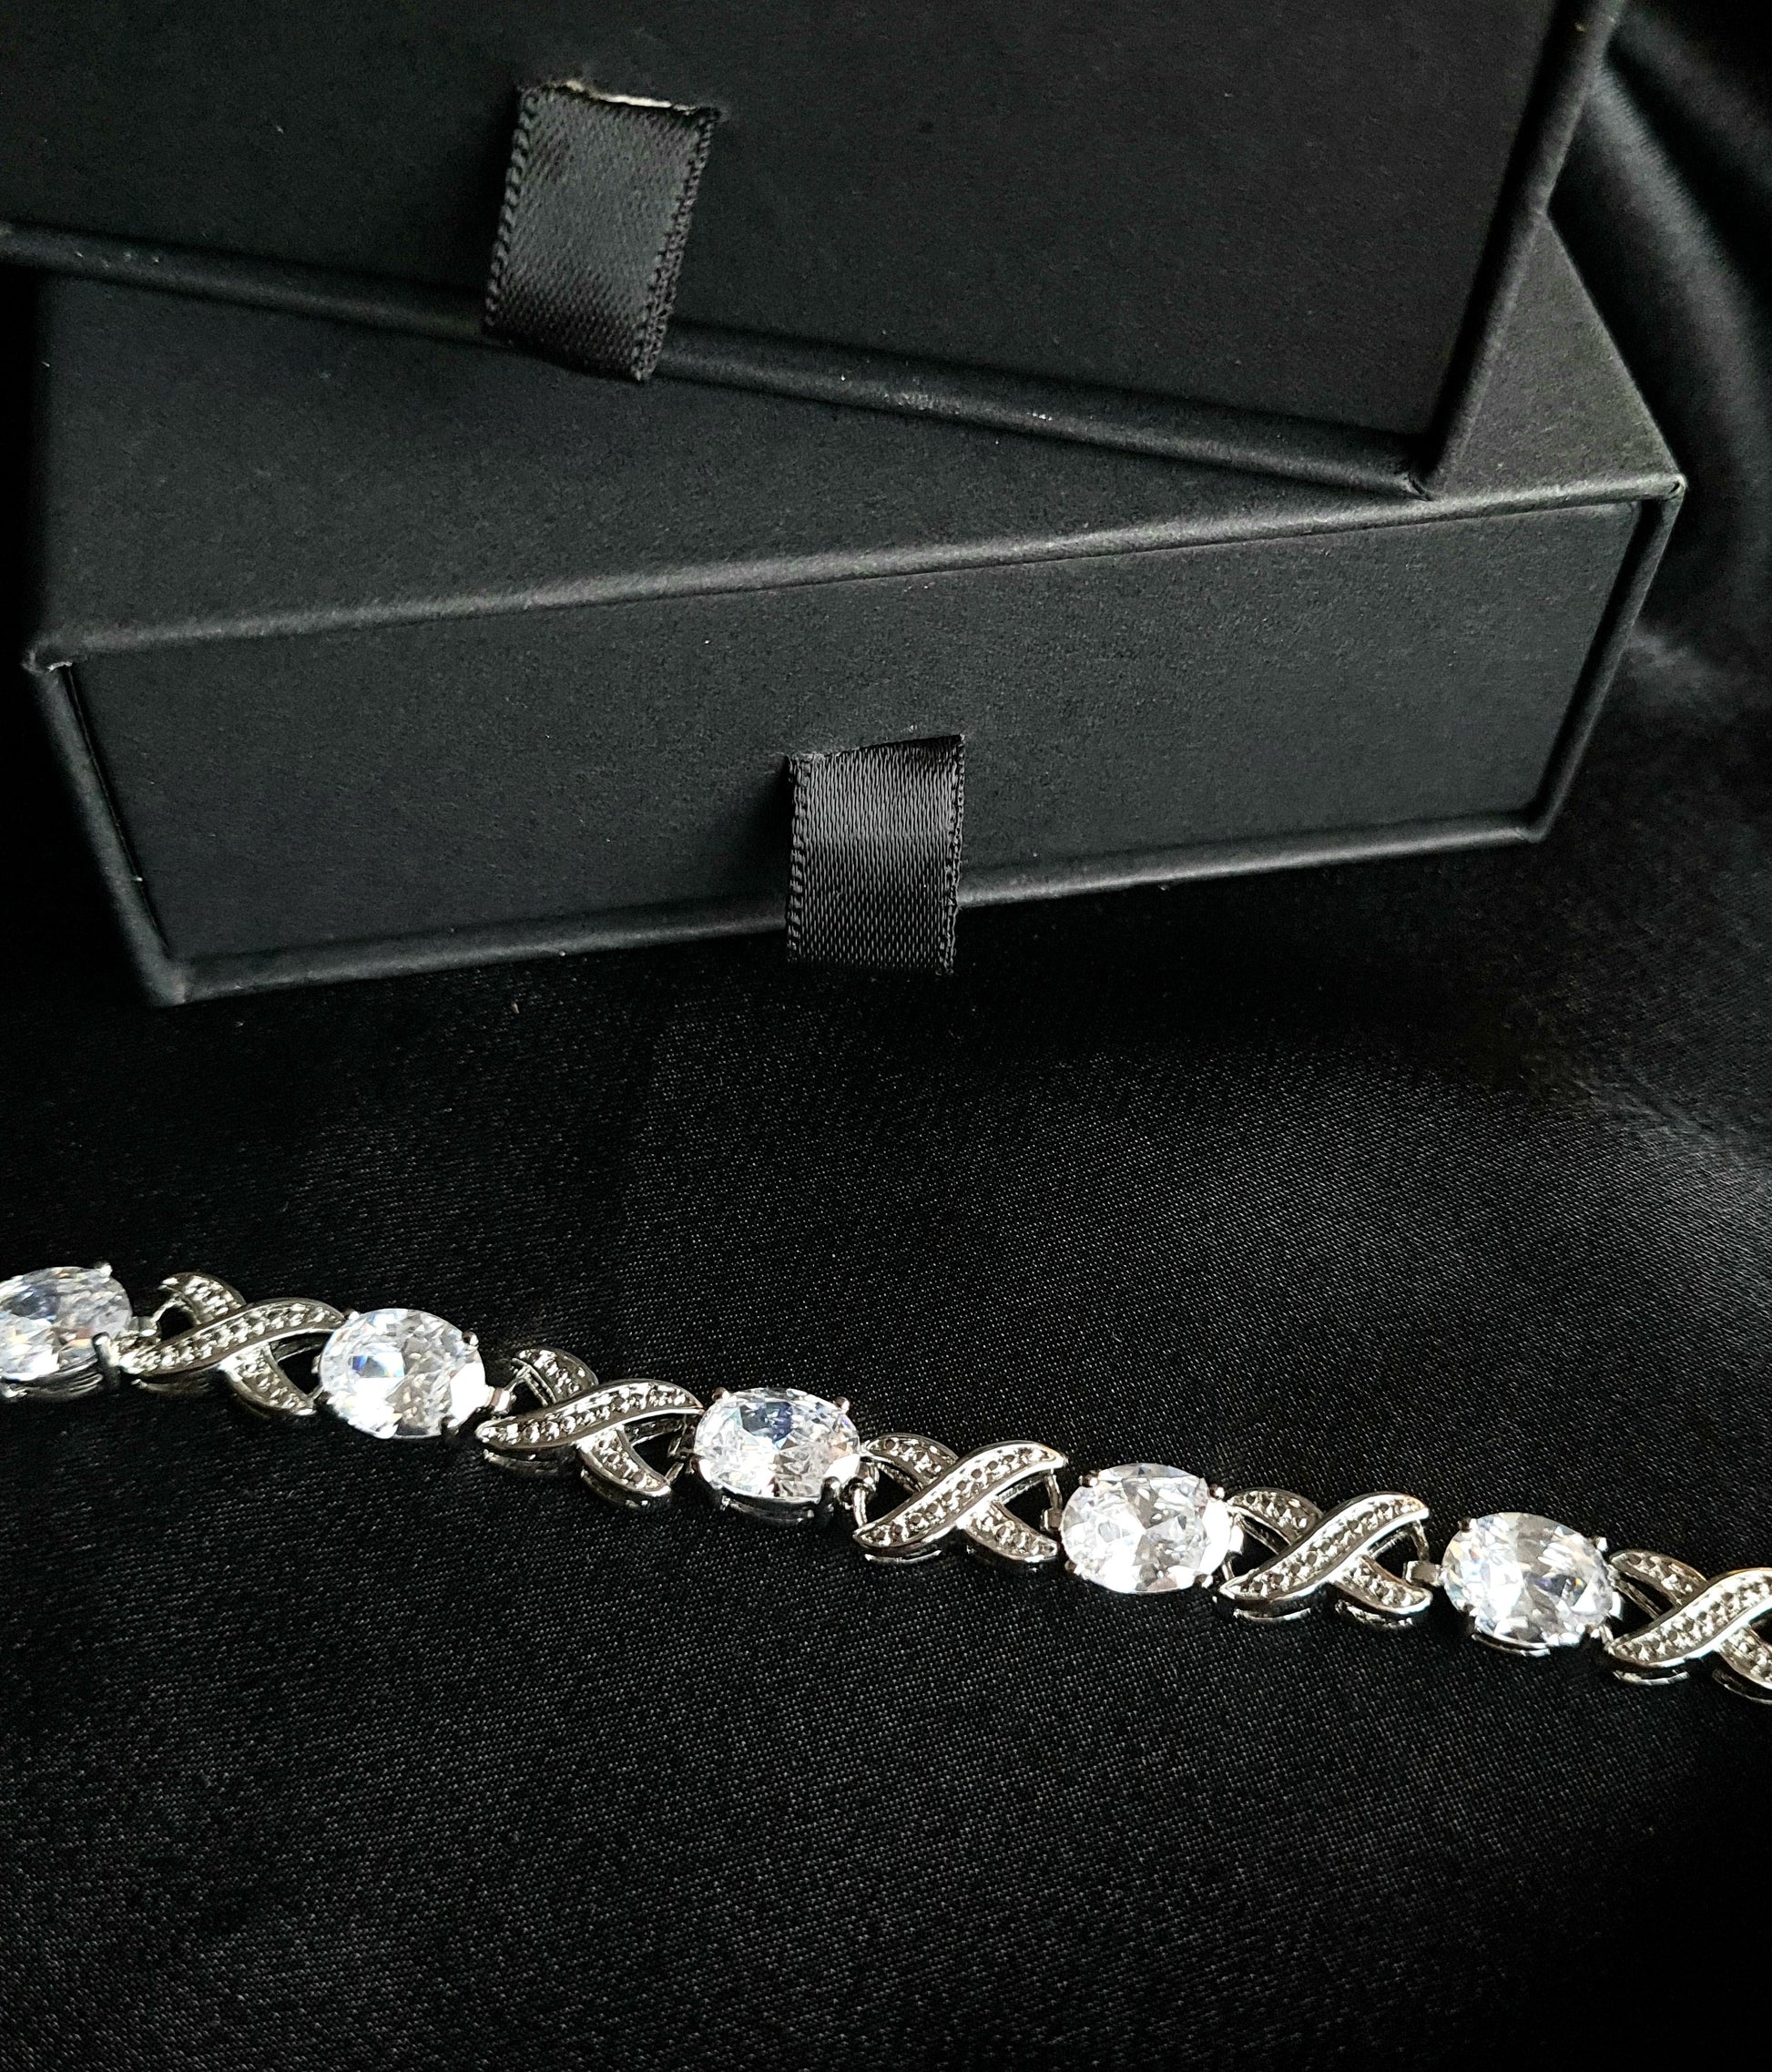 a close up look of a diamond bracelet  sparkling with Cubic Zirconia diamonds in a variety of shapes and sizes. displayed on a black fabric.